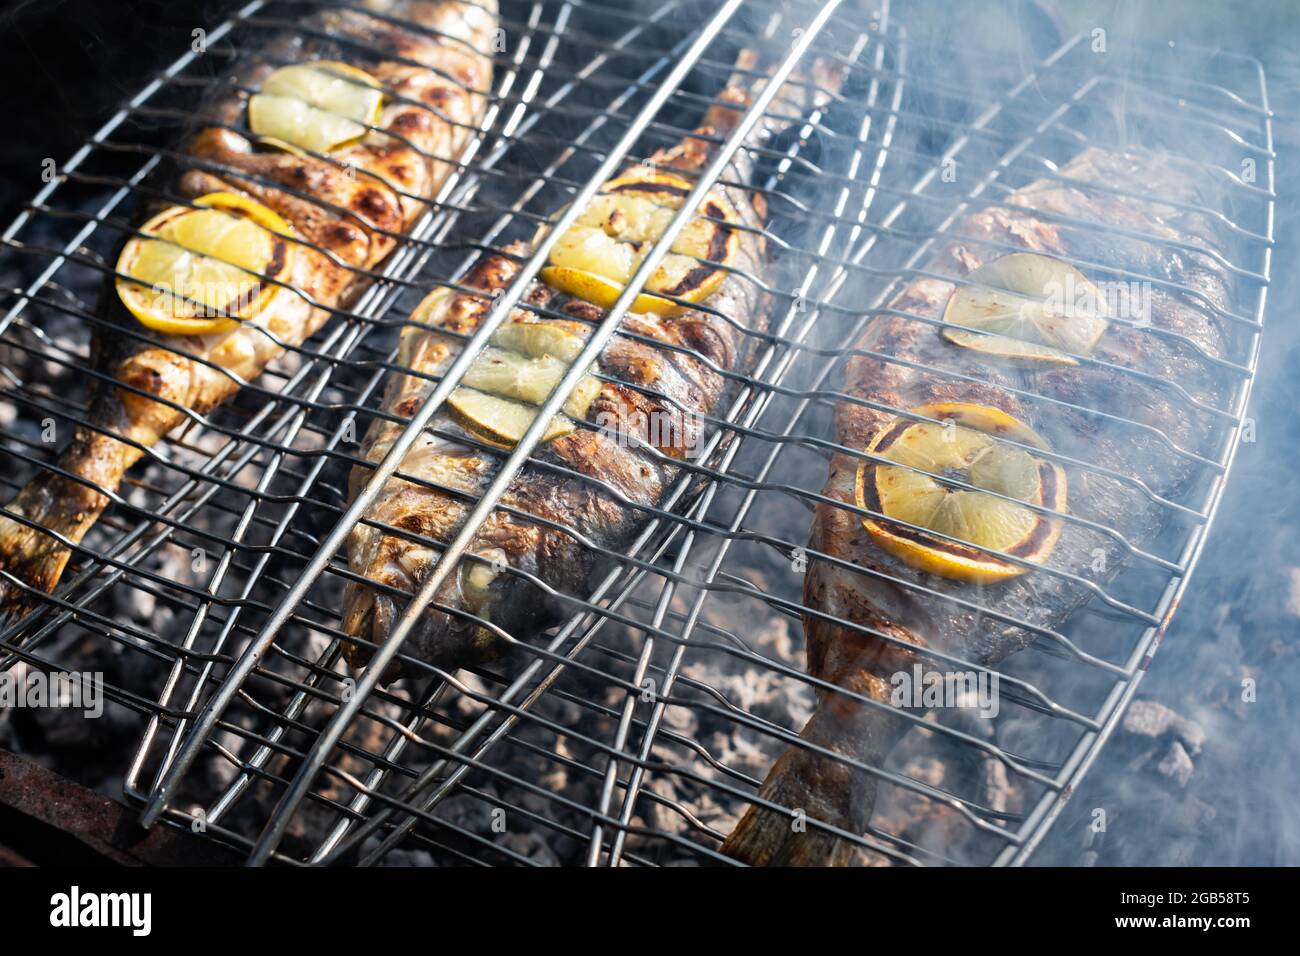 Grilling dorada fish on grill. Food photography Stock Photo